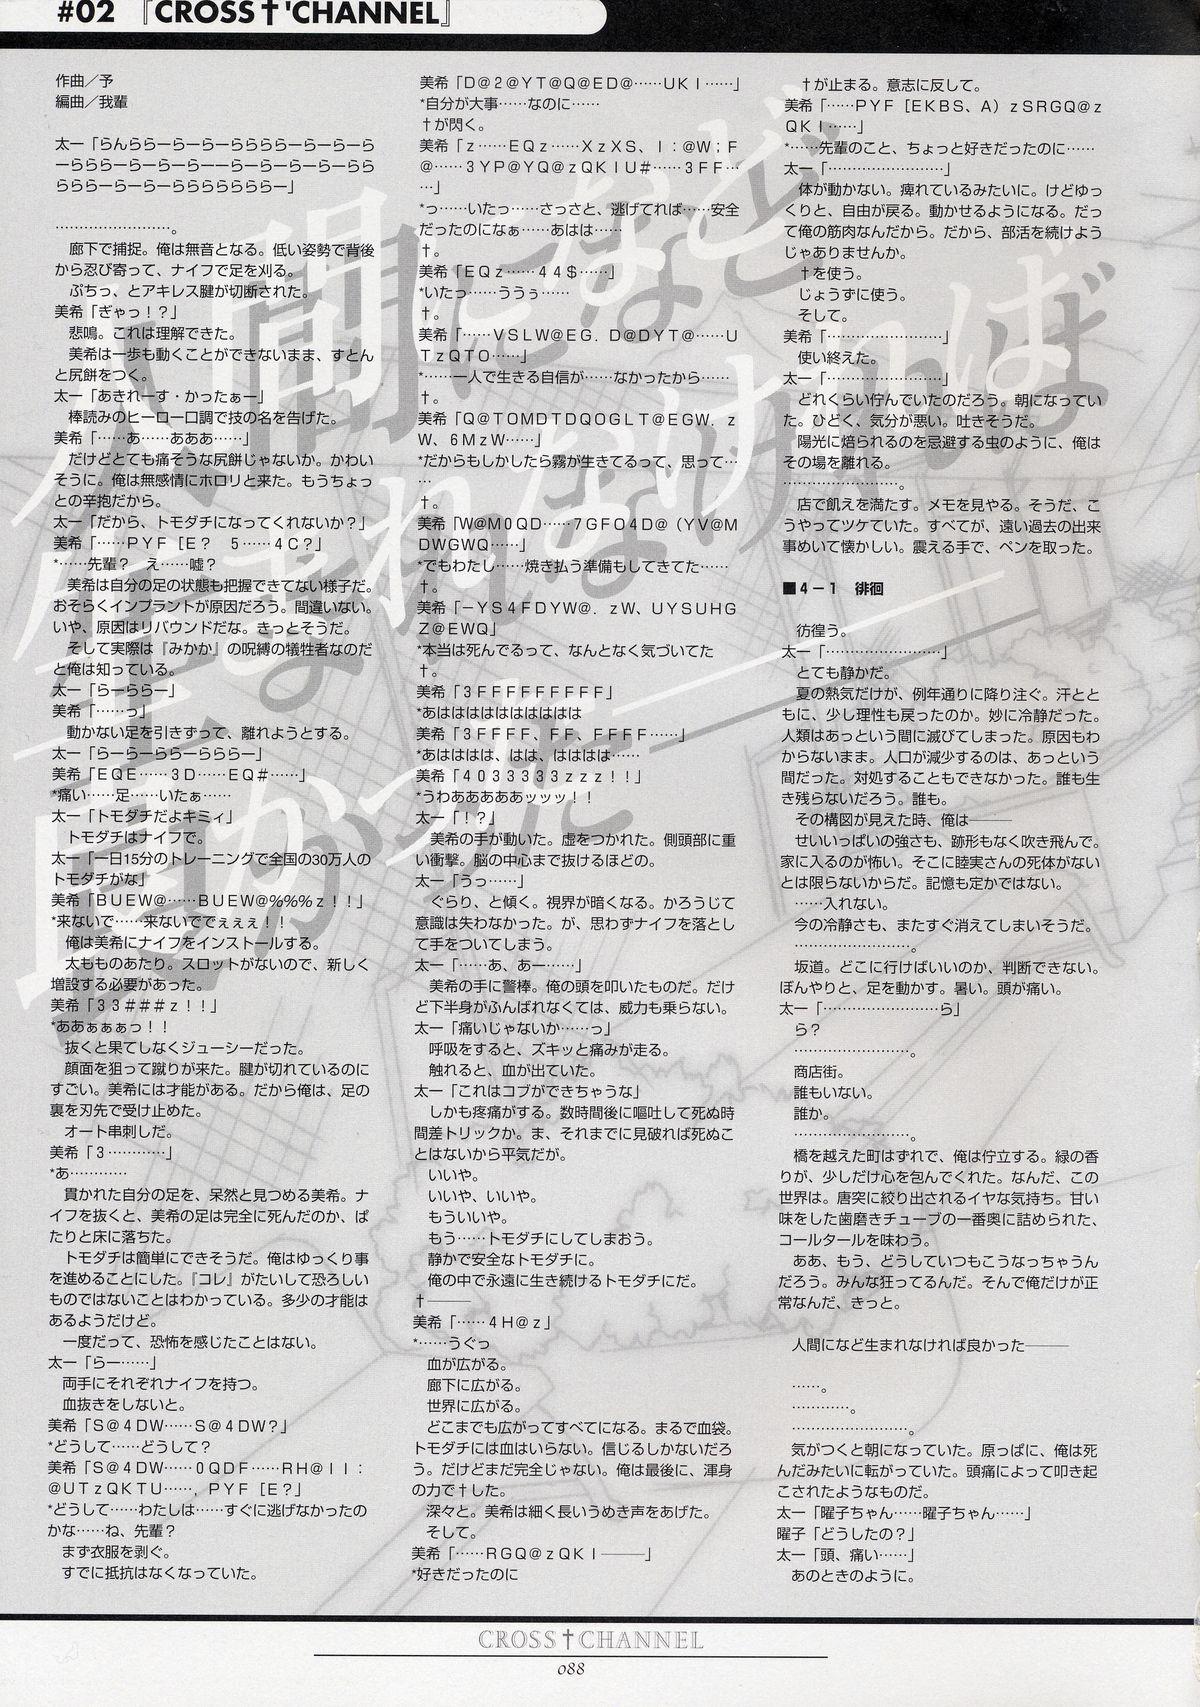 CROSS†CHANNEL Official Setting Materials 98